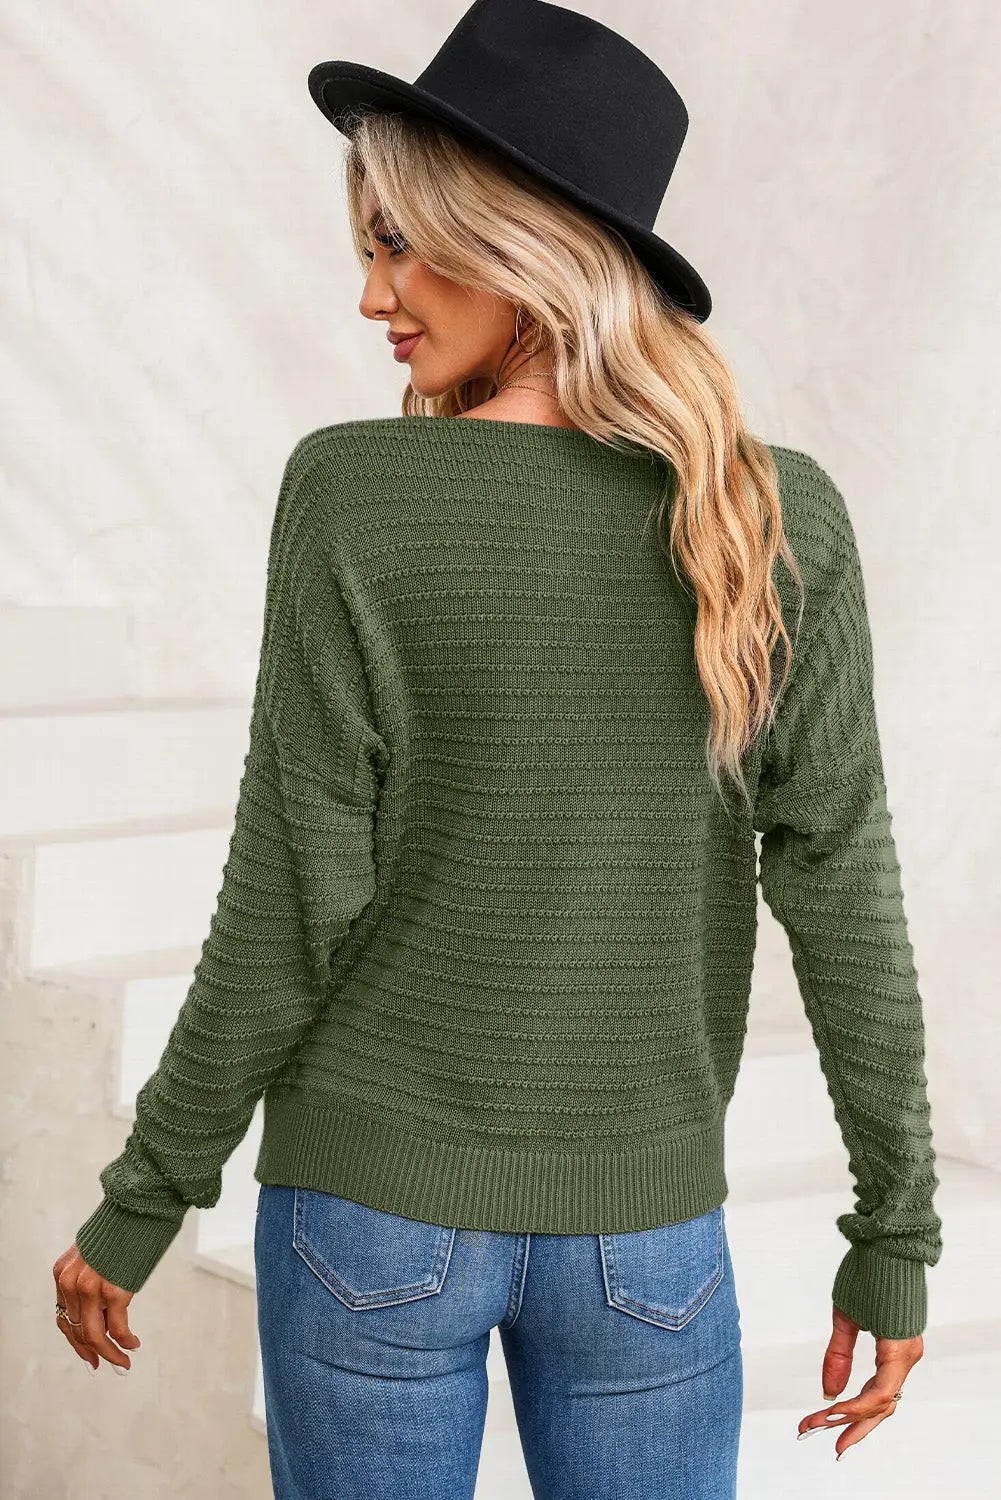 Green textured knit round neck dolman sleeve sweater - sweaters & cardigans